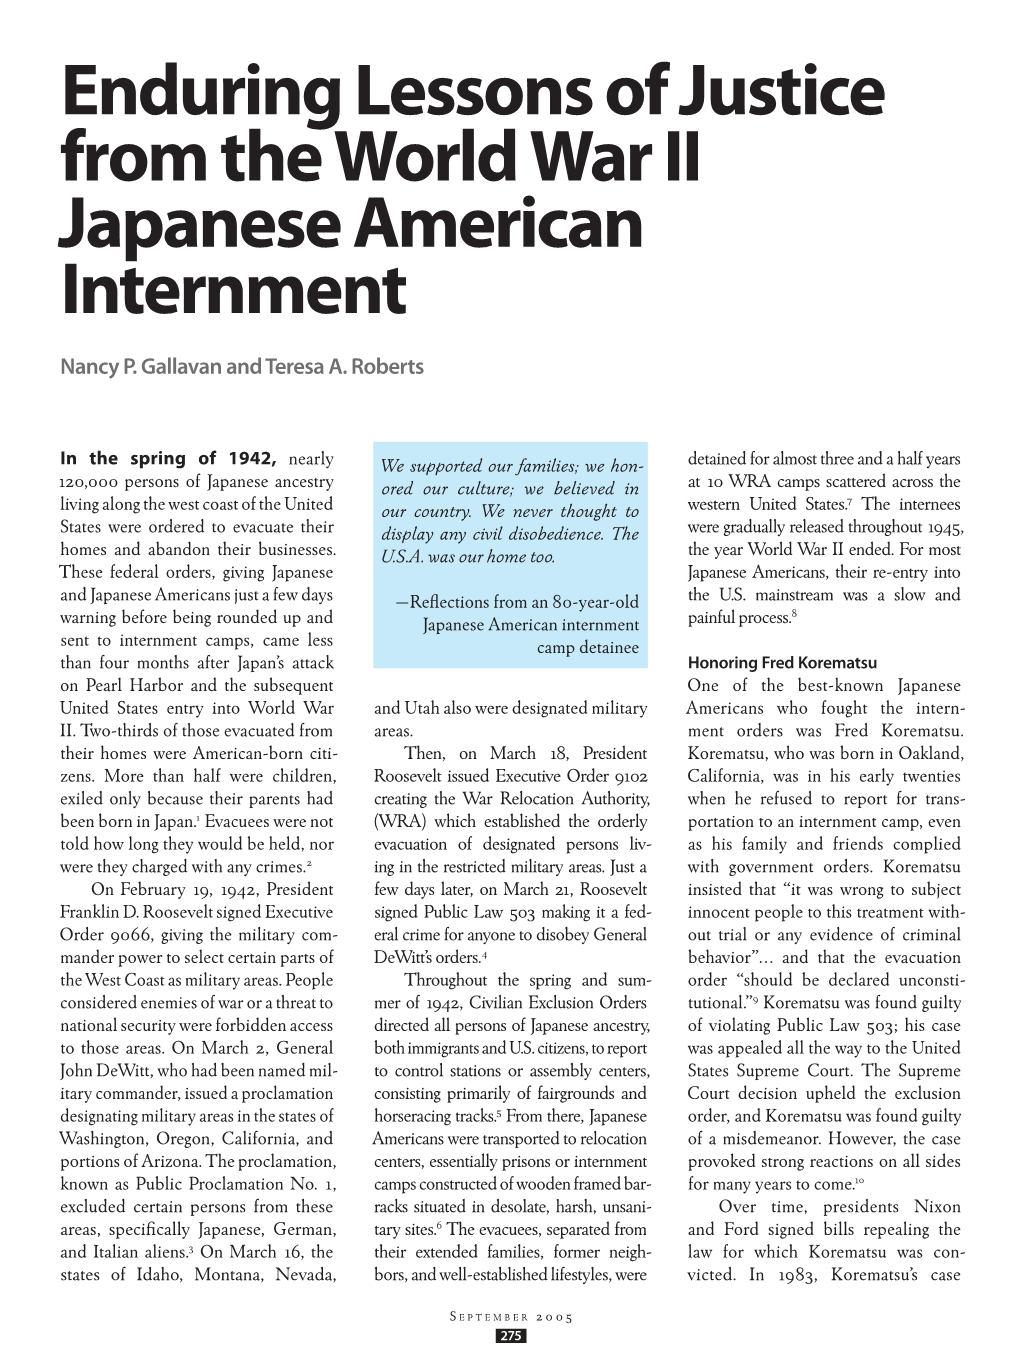 Enduring Lessons of Justice from the World War II Japanese American Internment